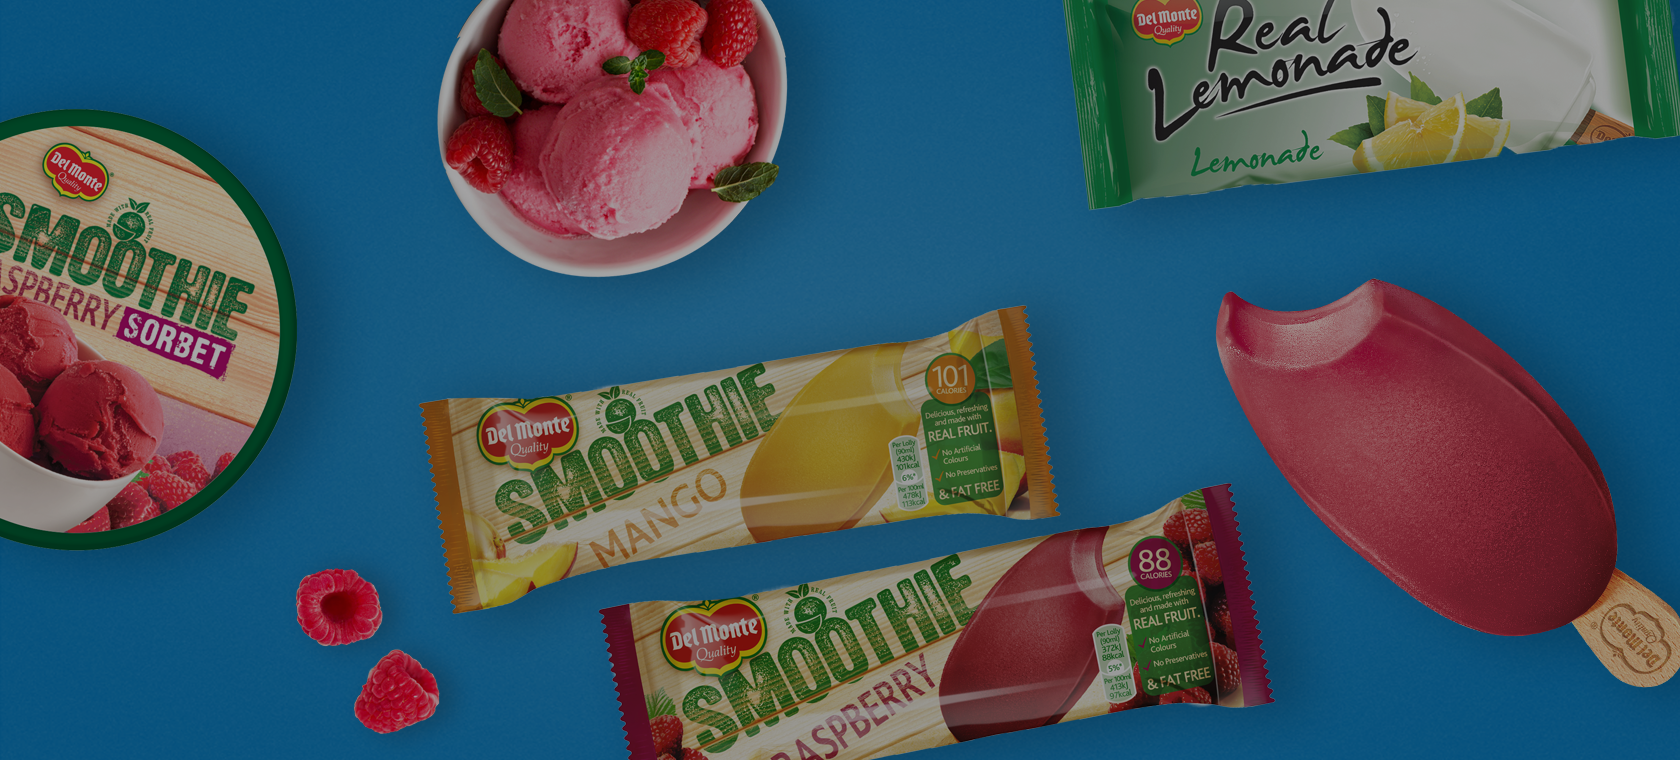 Del Monte Europe - Iced Smoothie | Raspberry Iced Smoothie Lolly